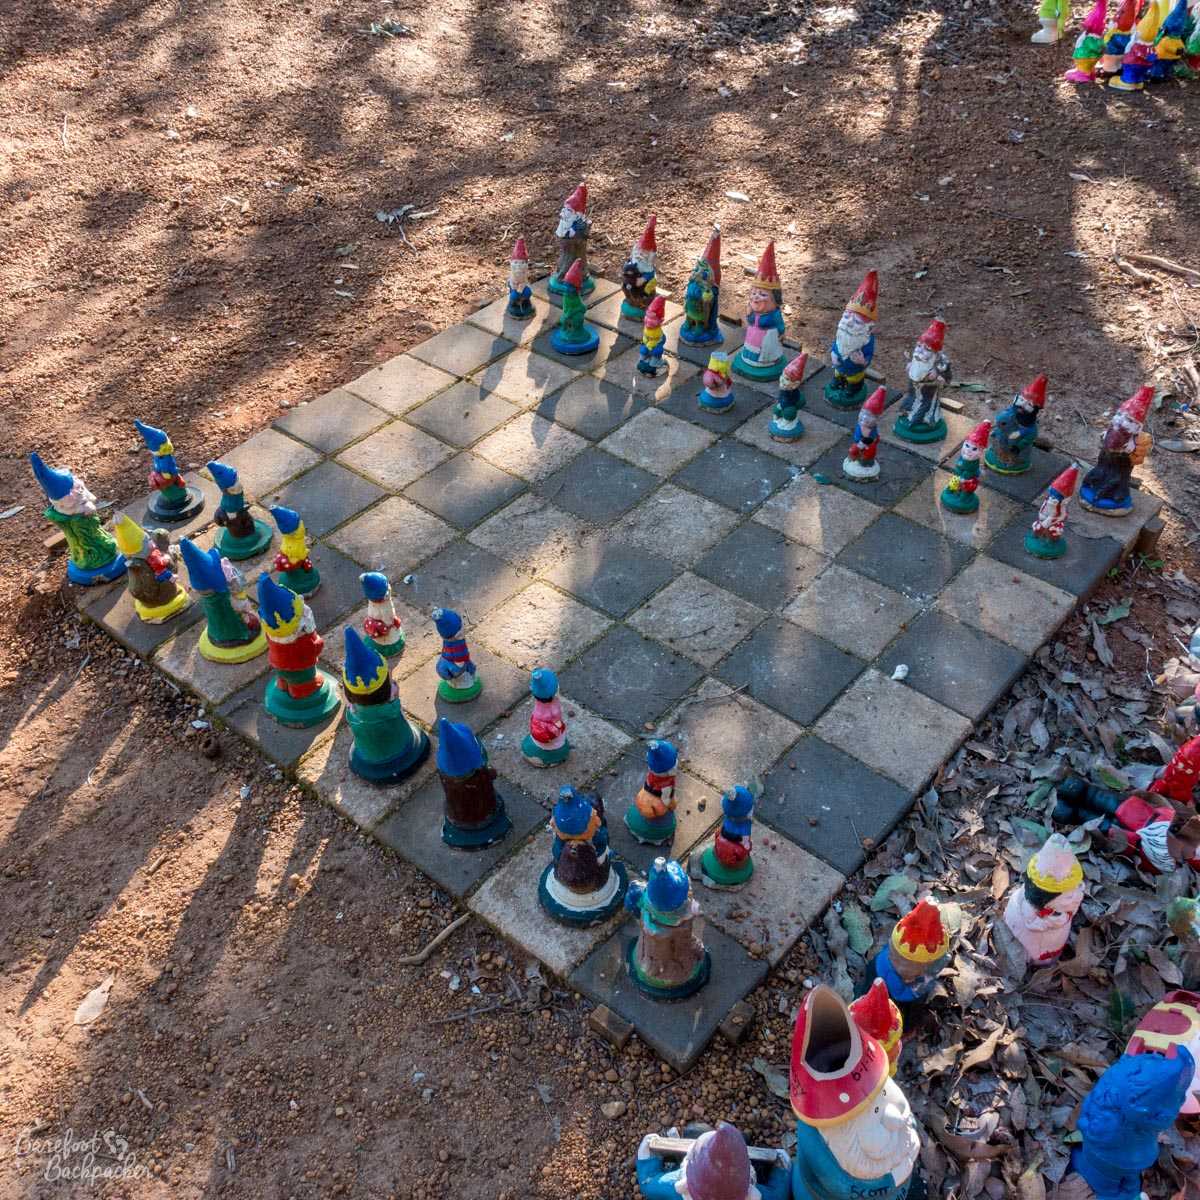 Some more gnomes at Gnomesville, playing chess